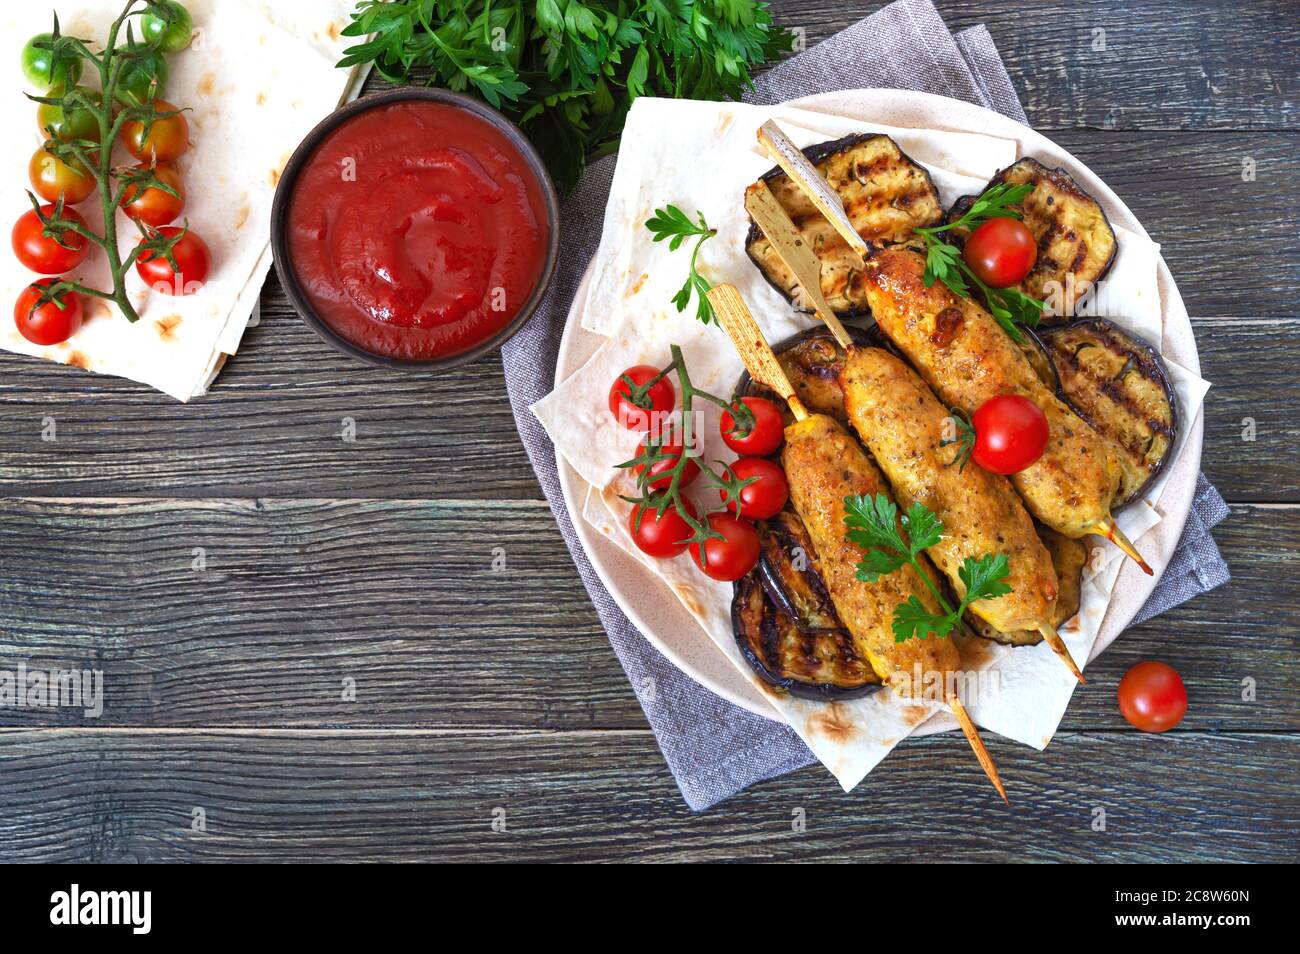 Lula Kebab With Grilled Eggplant On Pita Bread Dietary Chicken Kebabs On A Skewer With Vegetables The Top View Stock Photo Alamy,White Sweet Potato Name